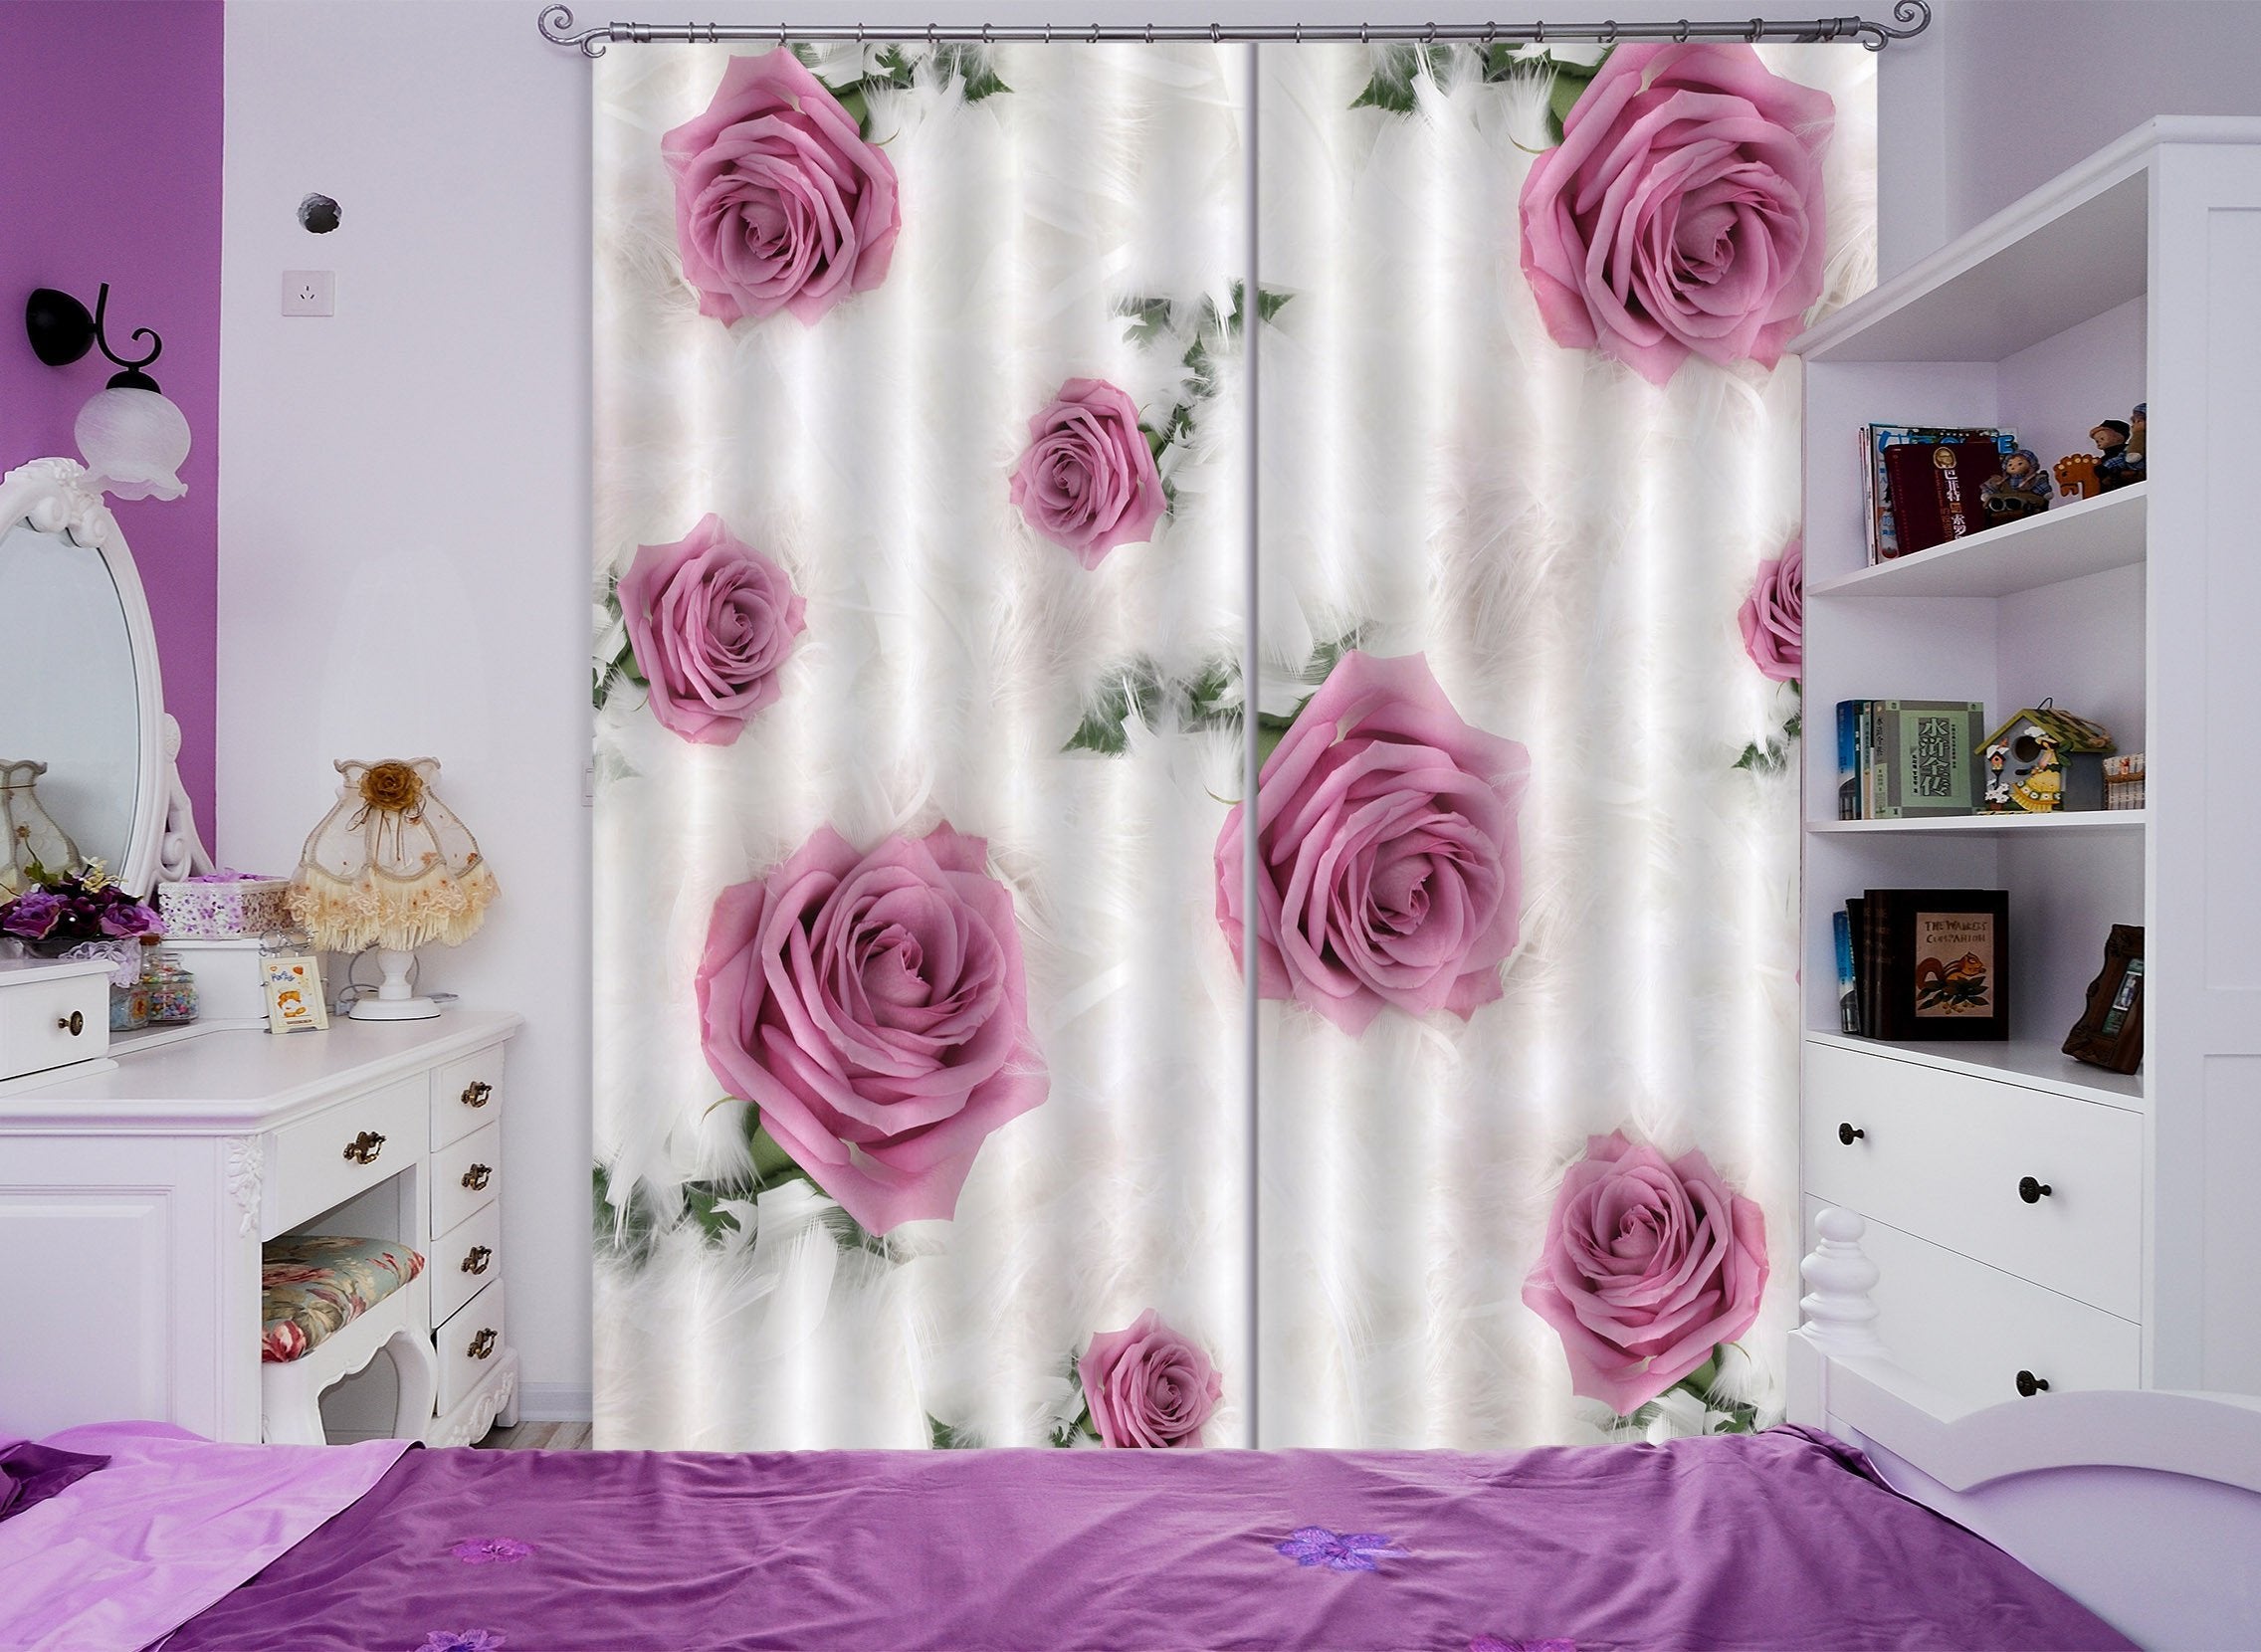 3D Flowers And Feathers 717 Curtains Drapes Wallpaper AJ Wallpaper 